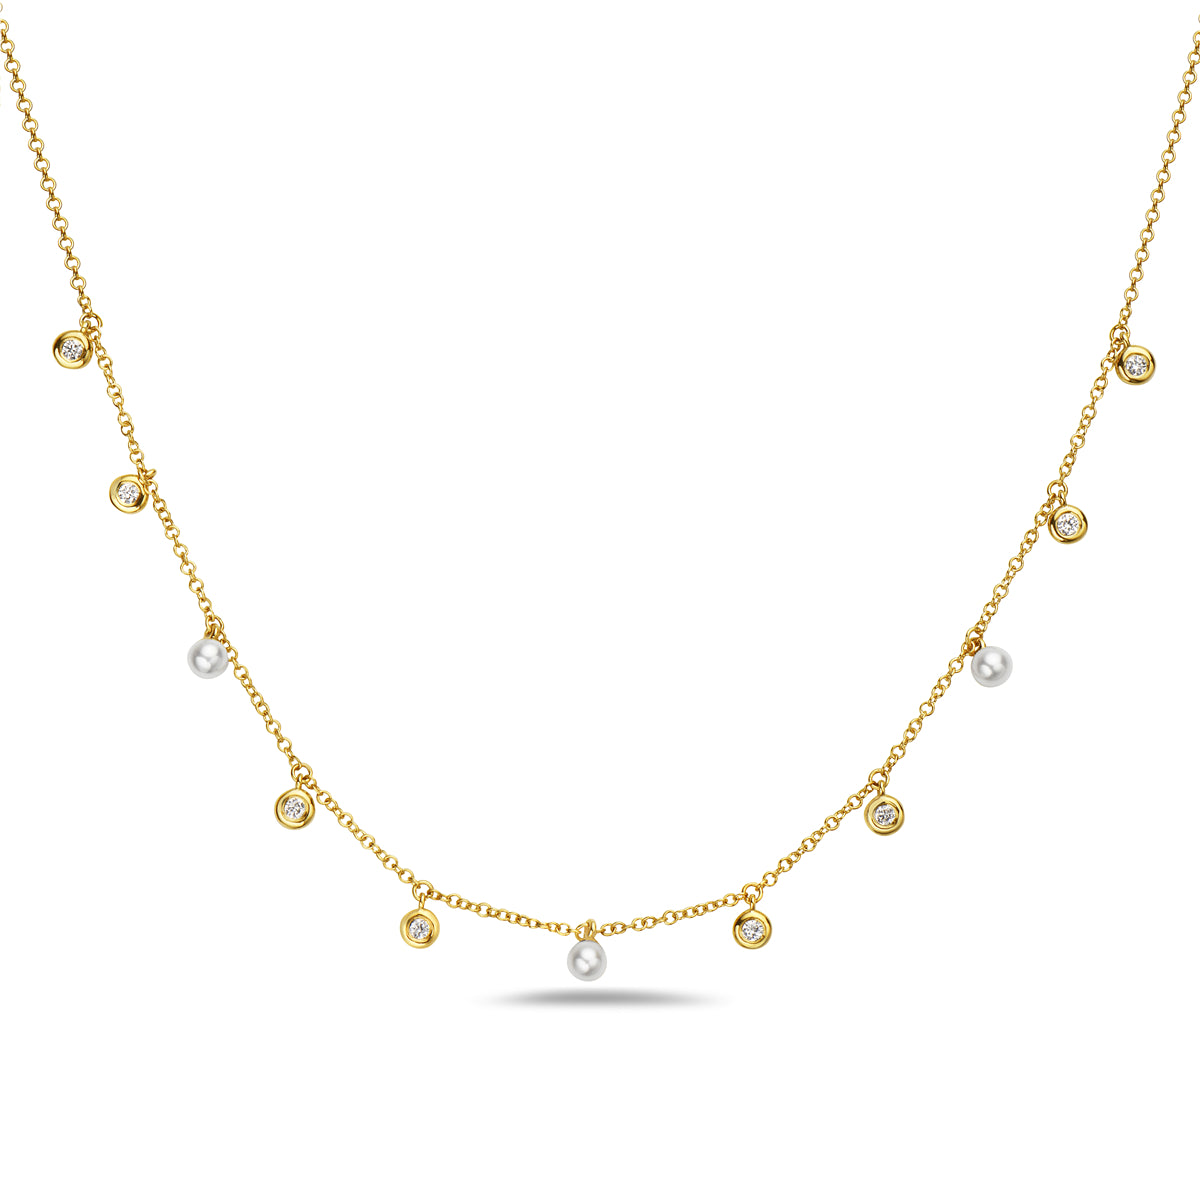 Droplets of Diamonds and Pearls Necklace